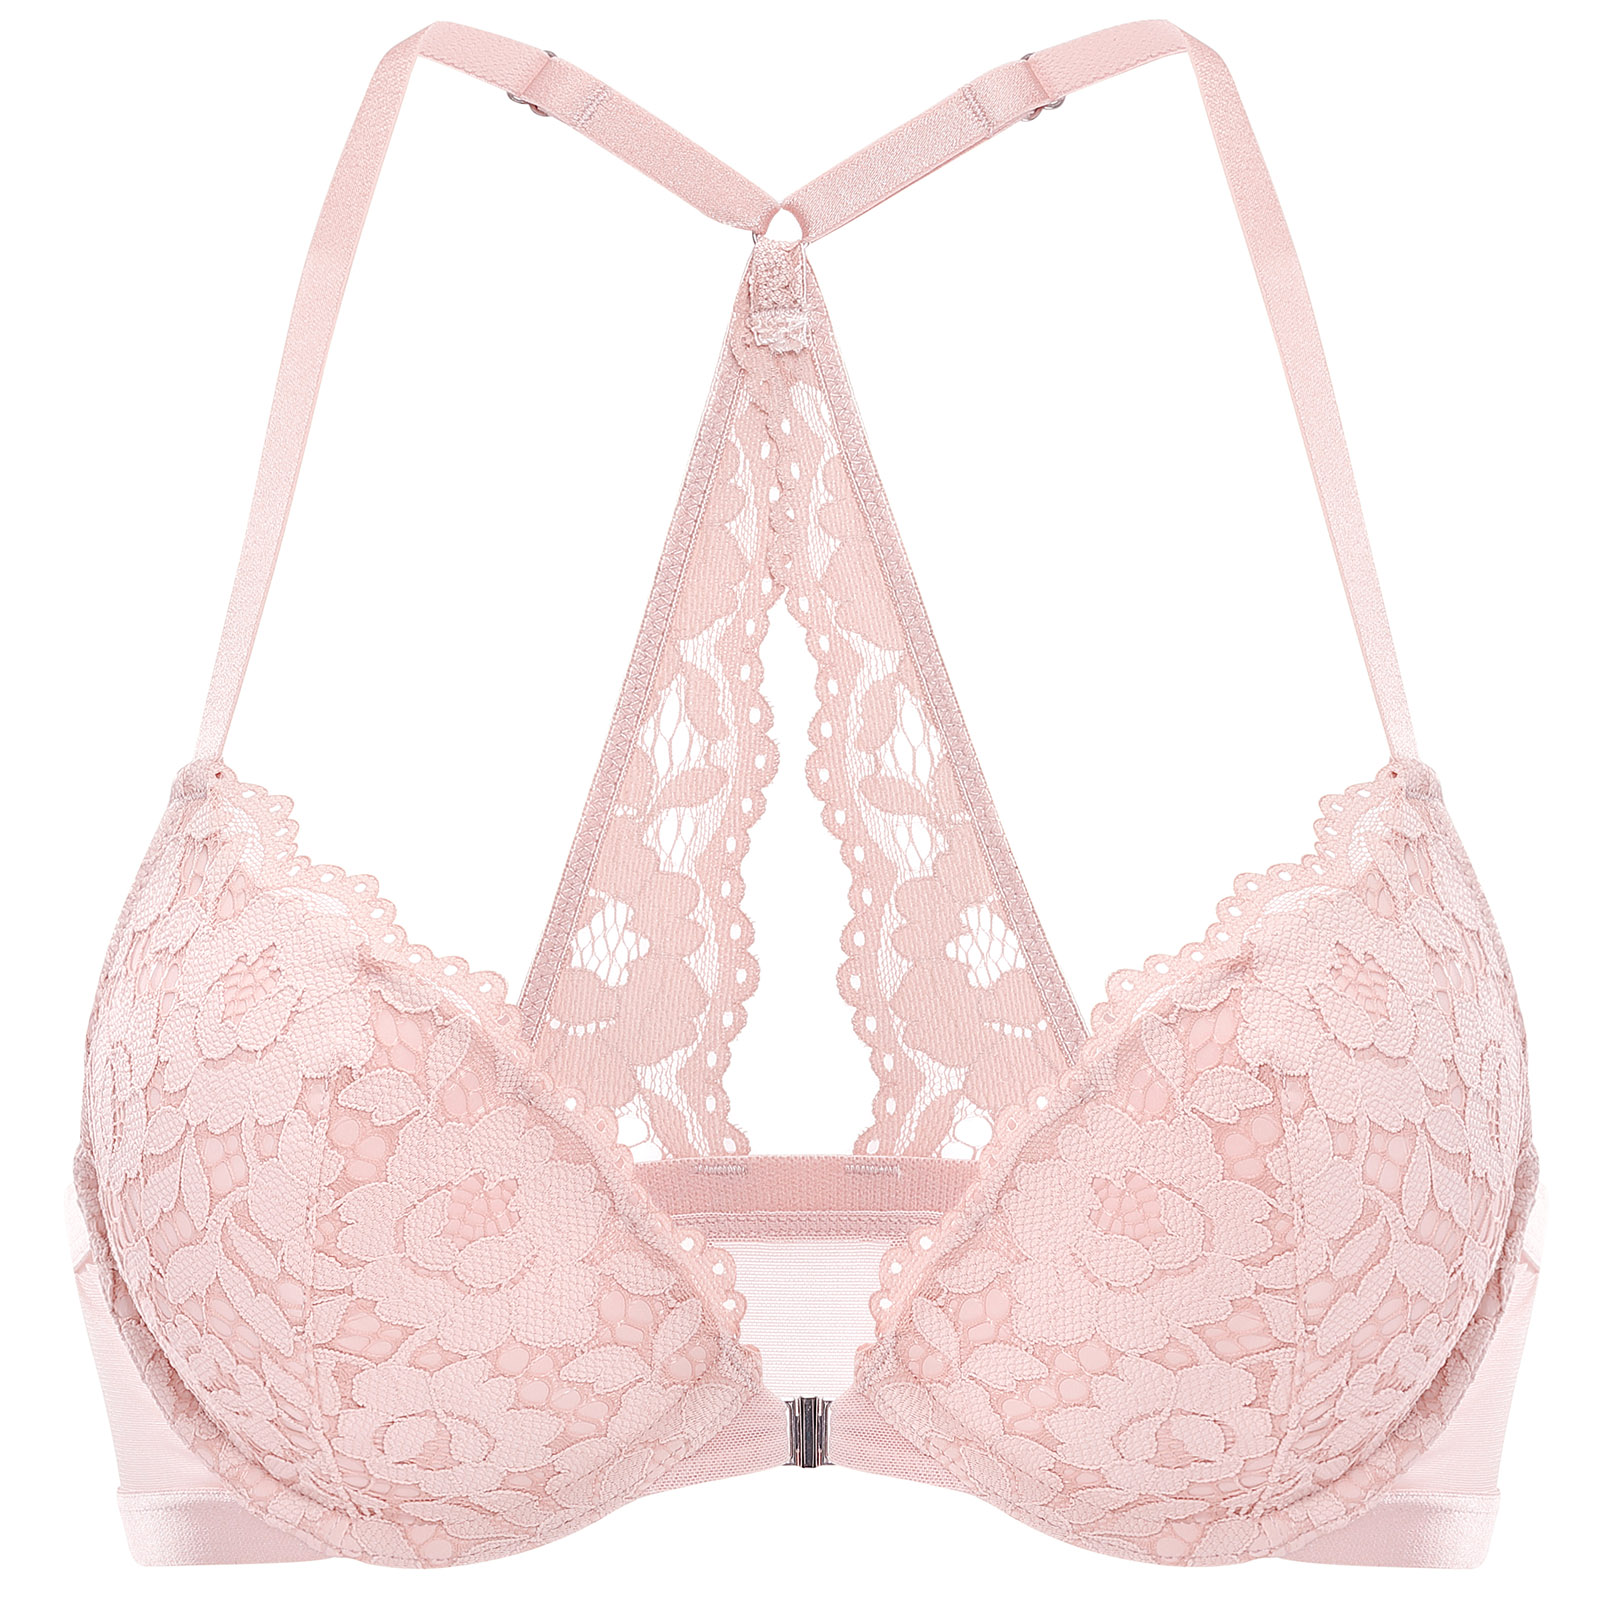 DOBREVA Womens Floral Front Closure Lace Bra Panty Set With Lace